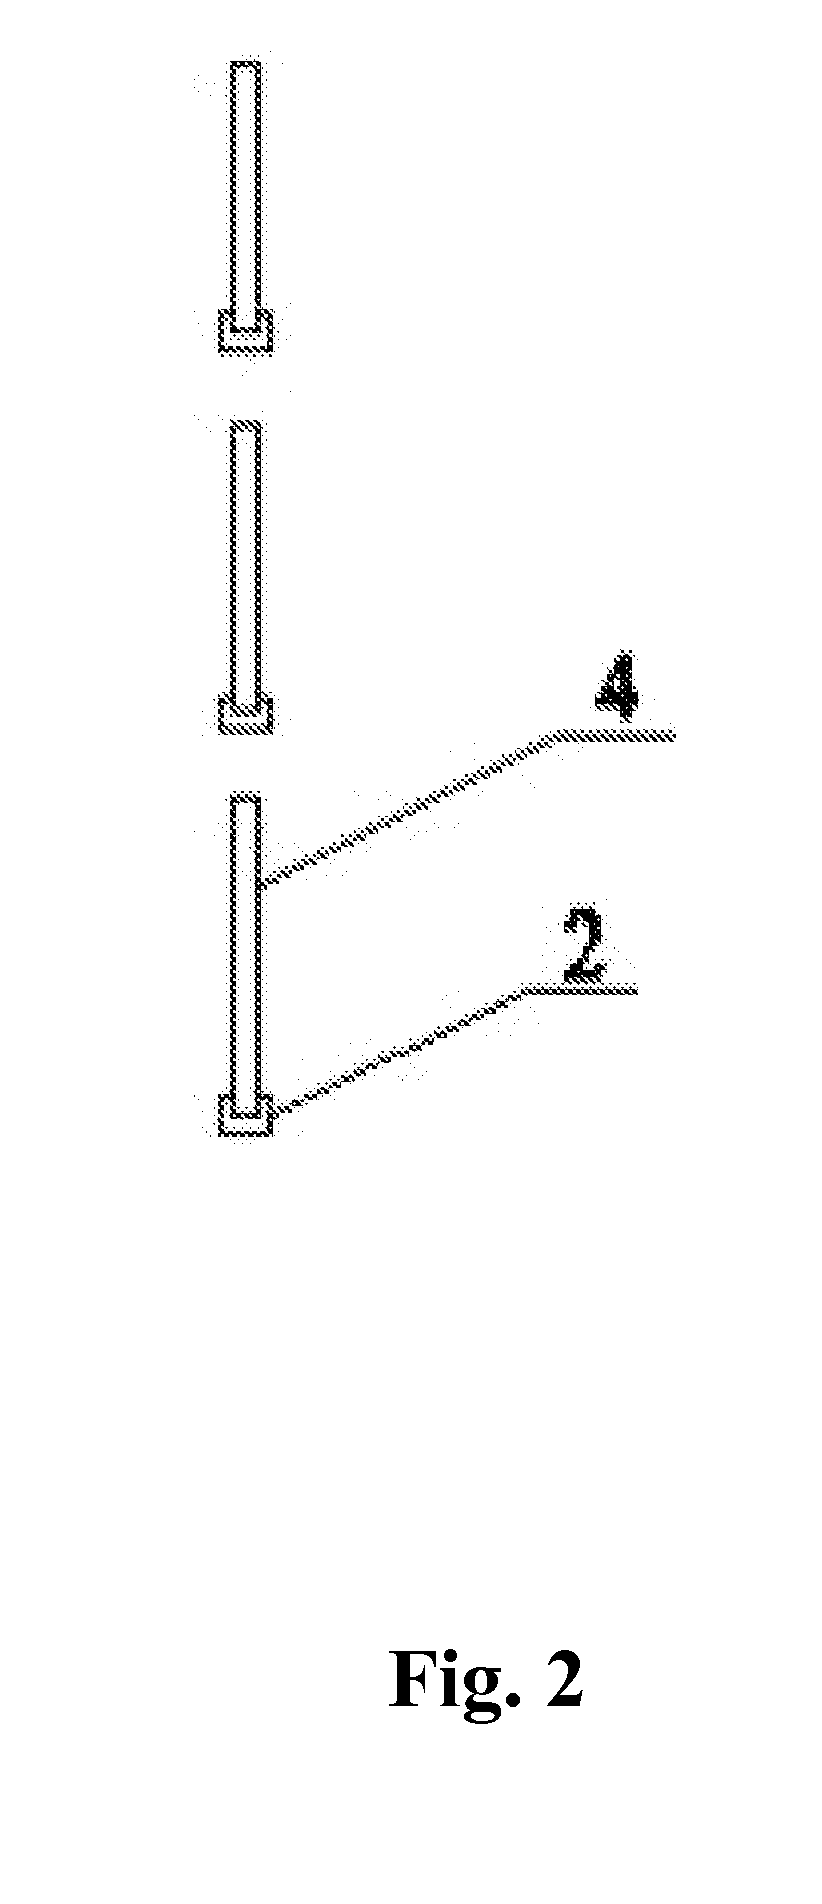 Blade device for a mixing propeller and the application thereof